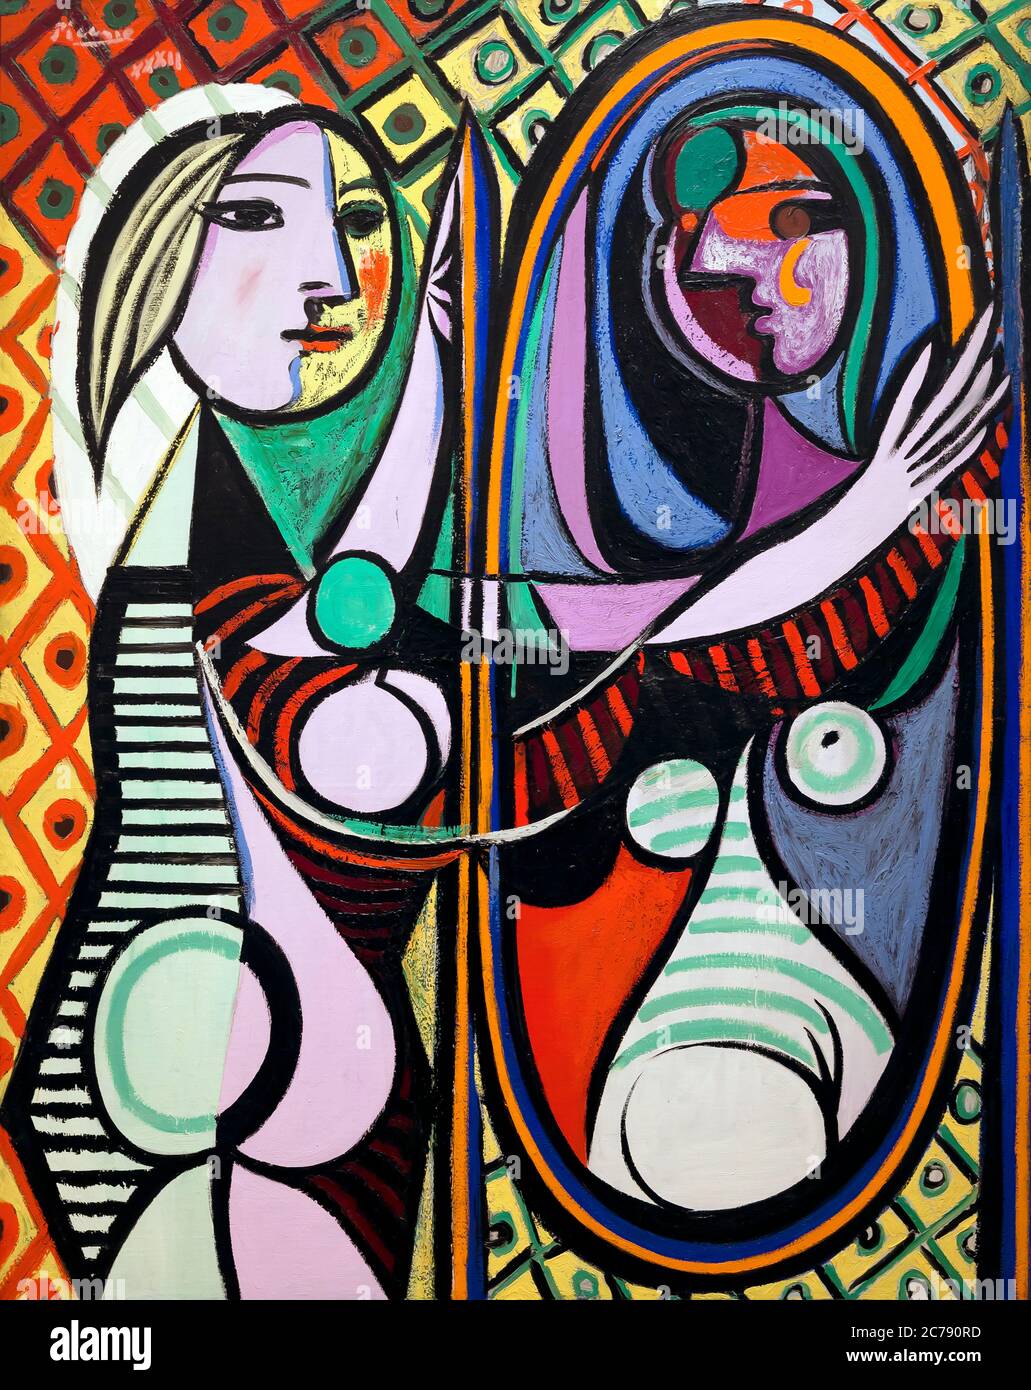 Girl before a Mirror, Pablo Picasso, 1932 Stock Photo - Alamy